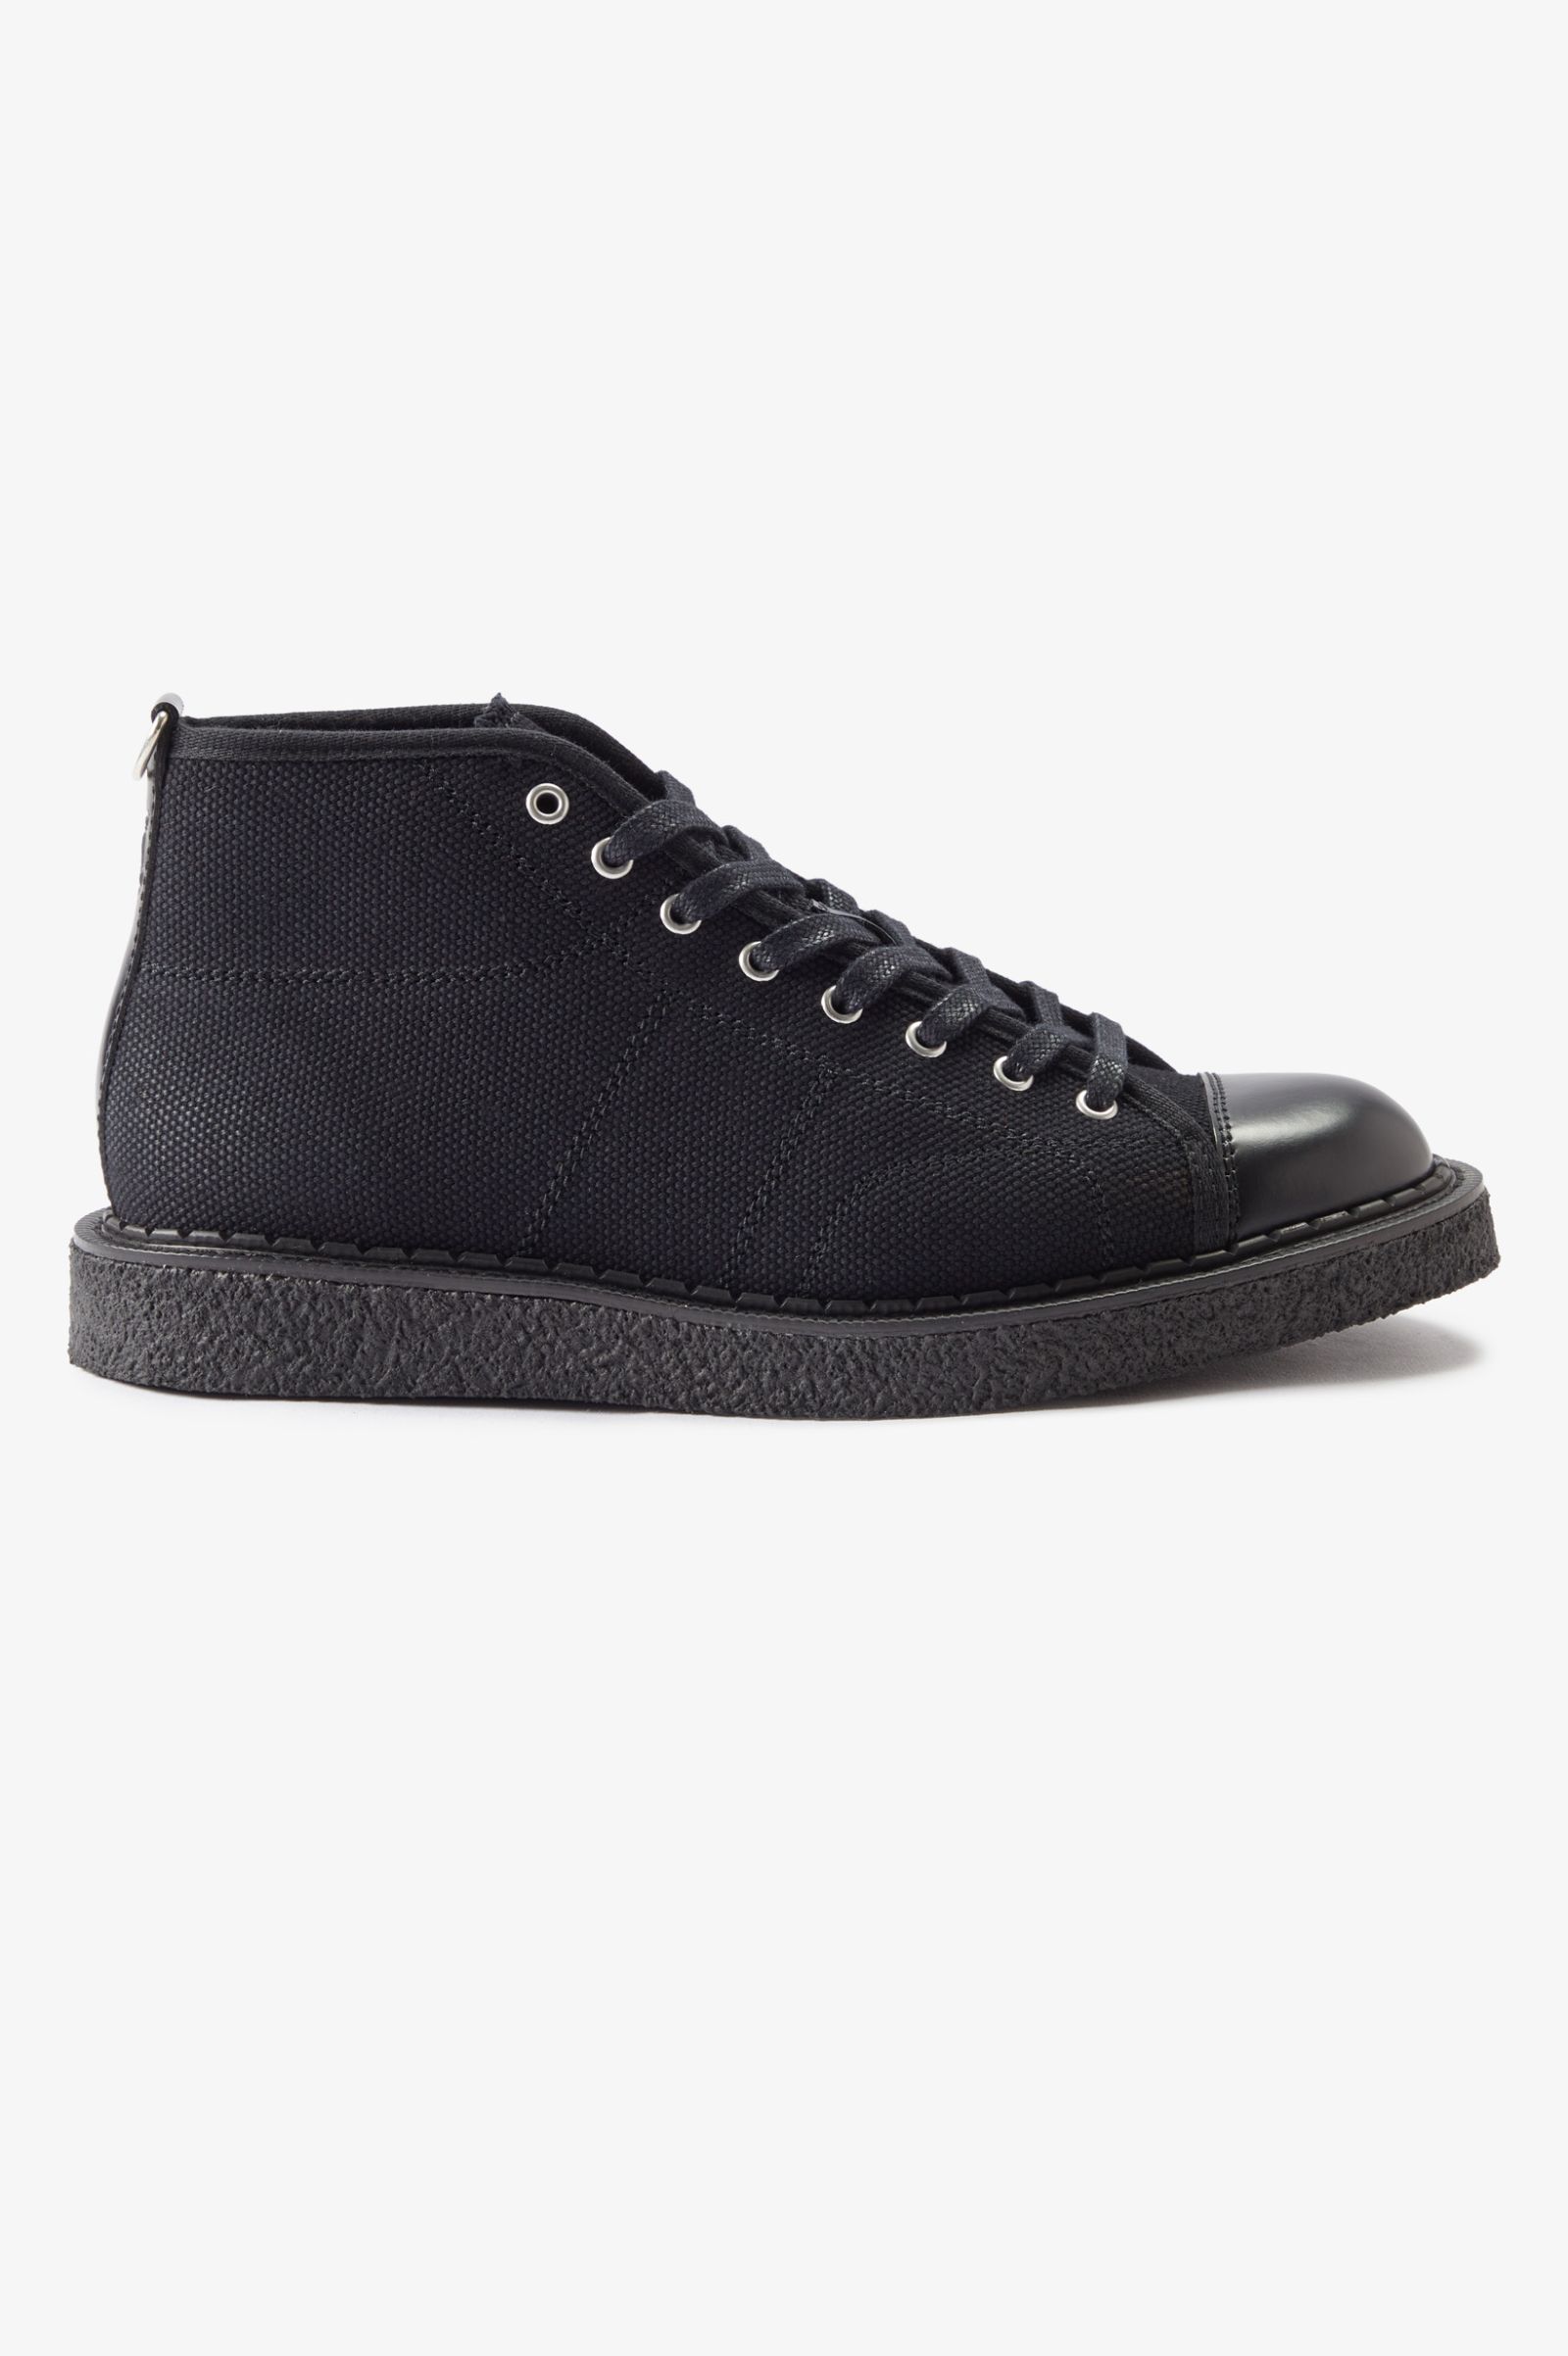 George Cox & Fred Perry Monkey Boot HVY CNVS in Black